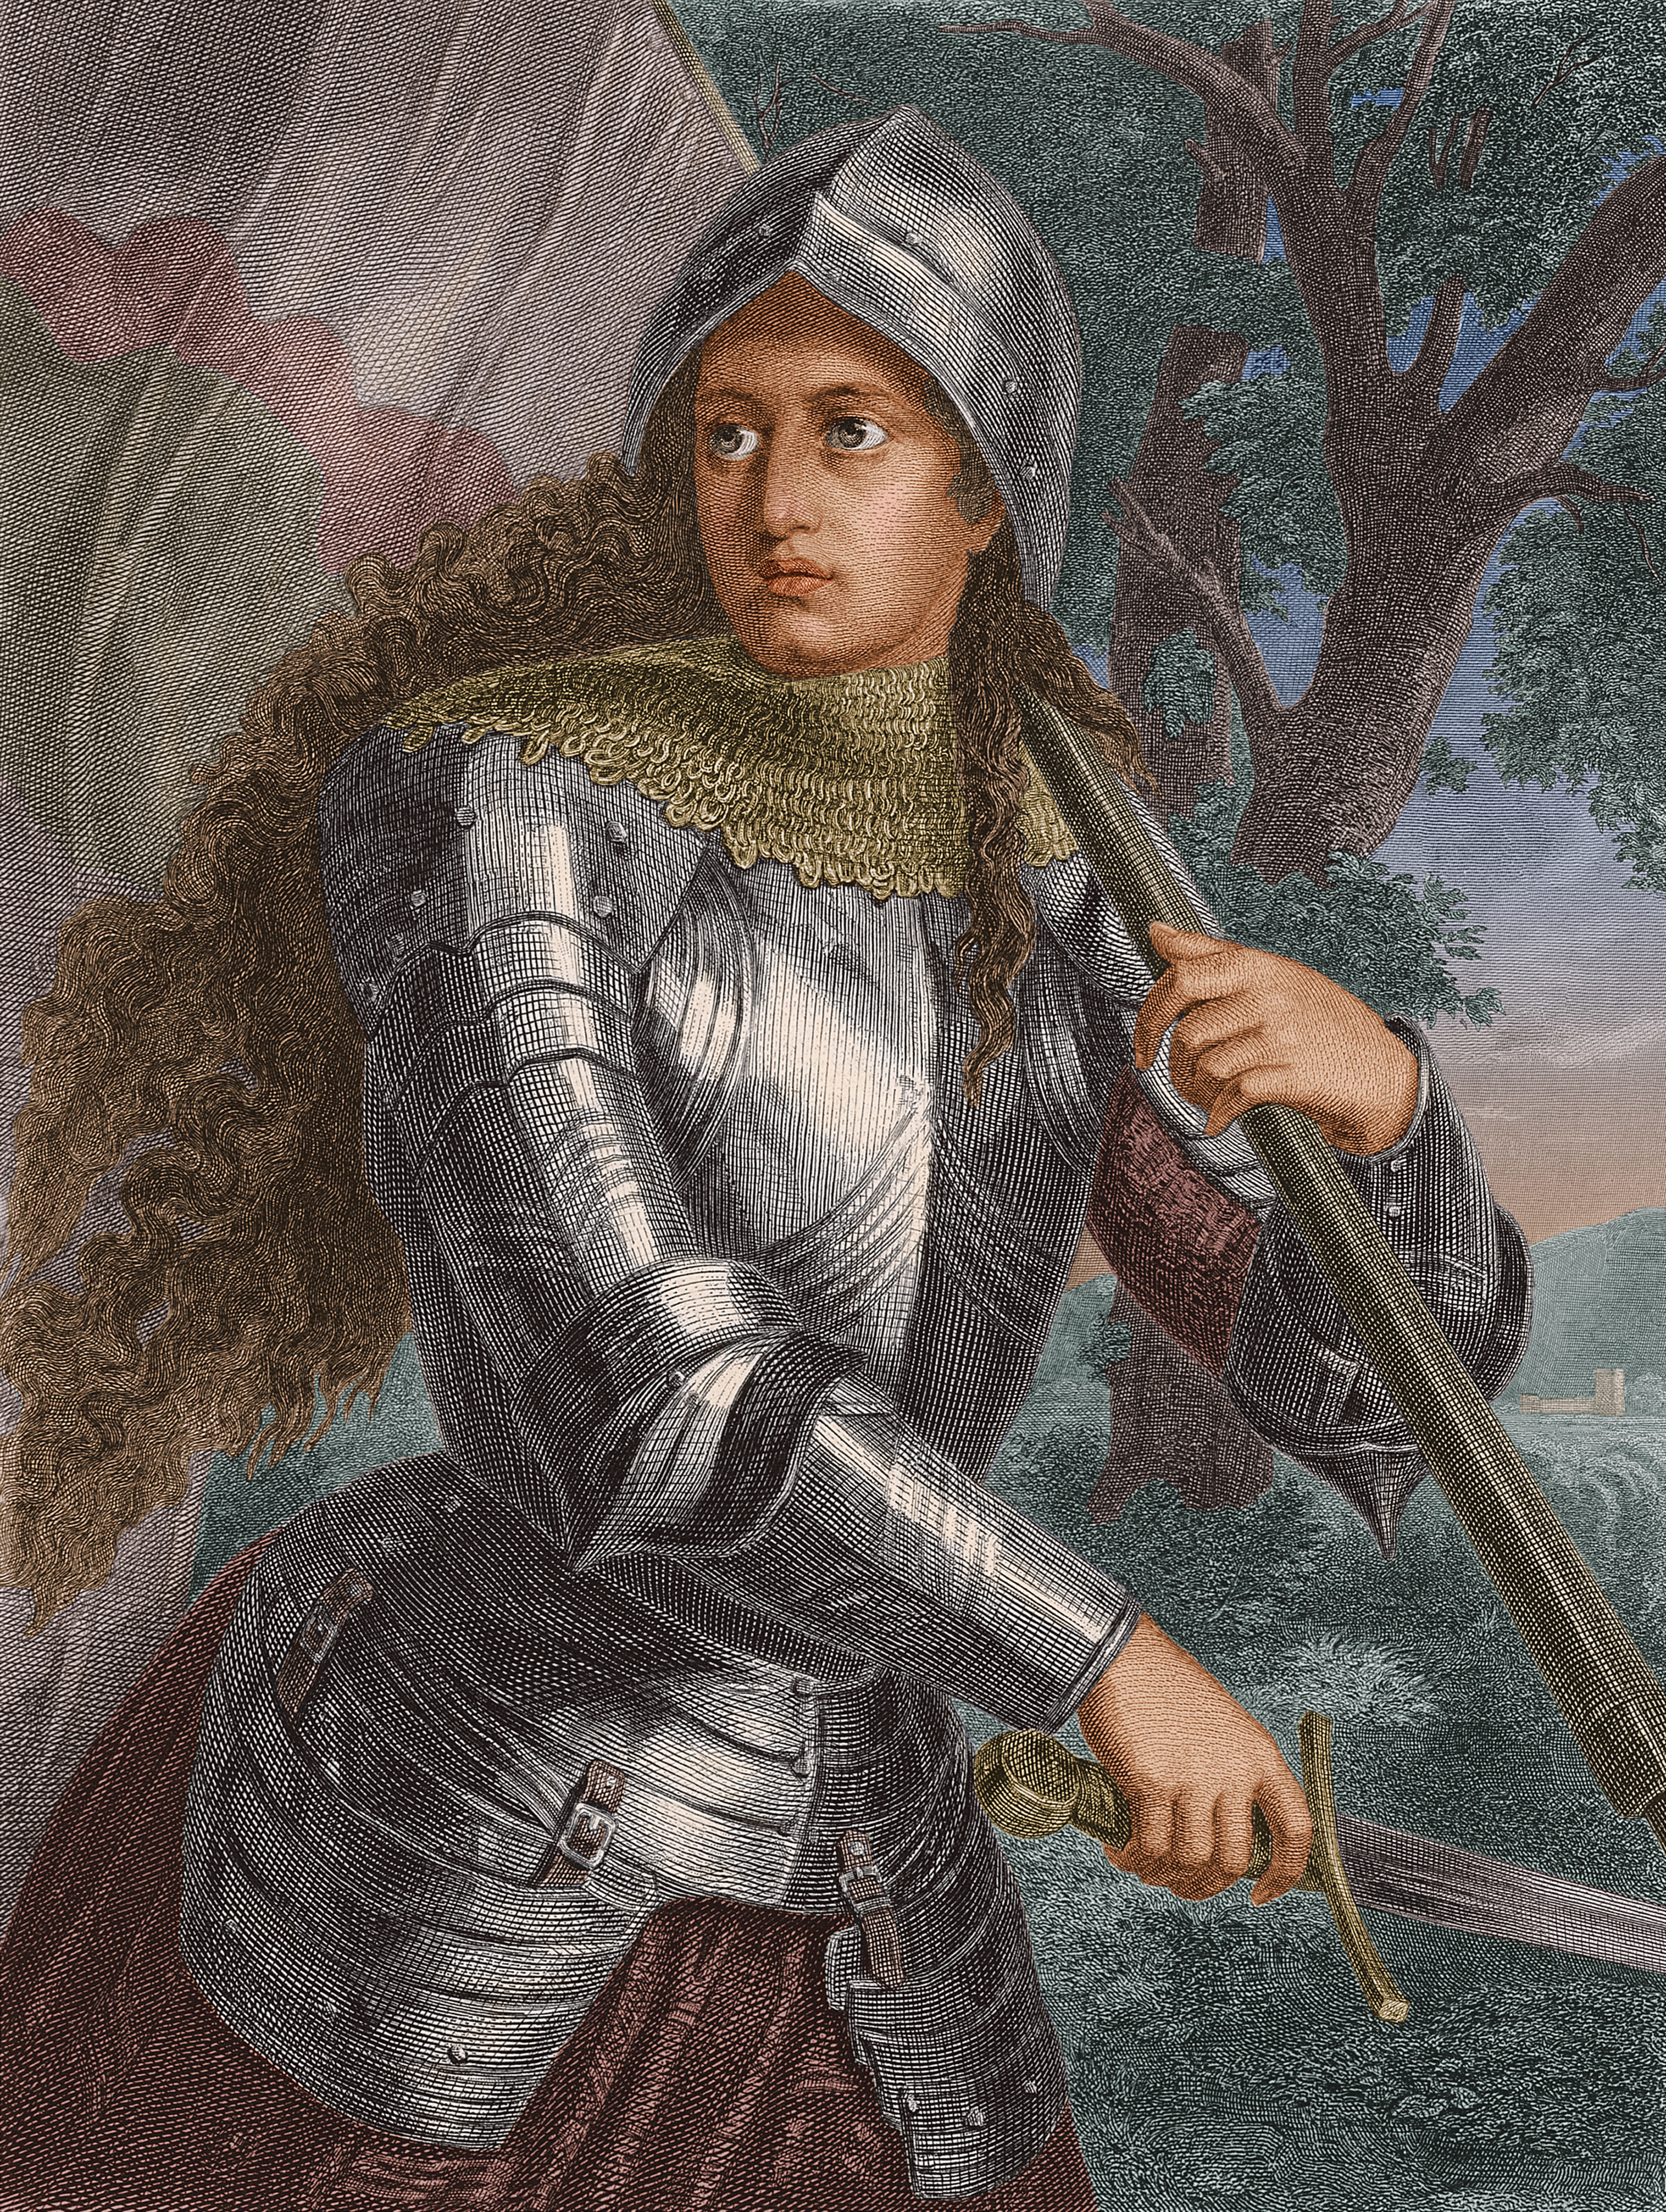 Joan of Arc, France Spurred by dreams in which Christian saints would urge her to fight the English, Joan  of Arc famously led the assault that lifted the English siege of the city of Orleans in 1429, turning the tide in favor of the French. But a few years later, Joan was captured and burned in a public square on grounds of witchcraft.